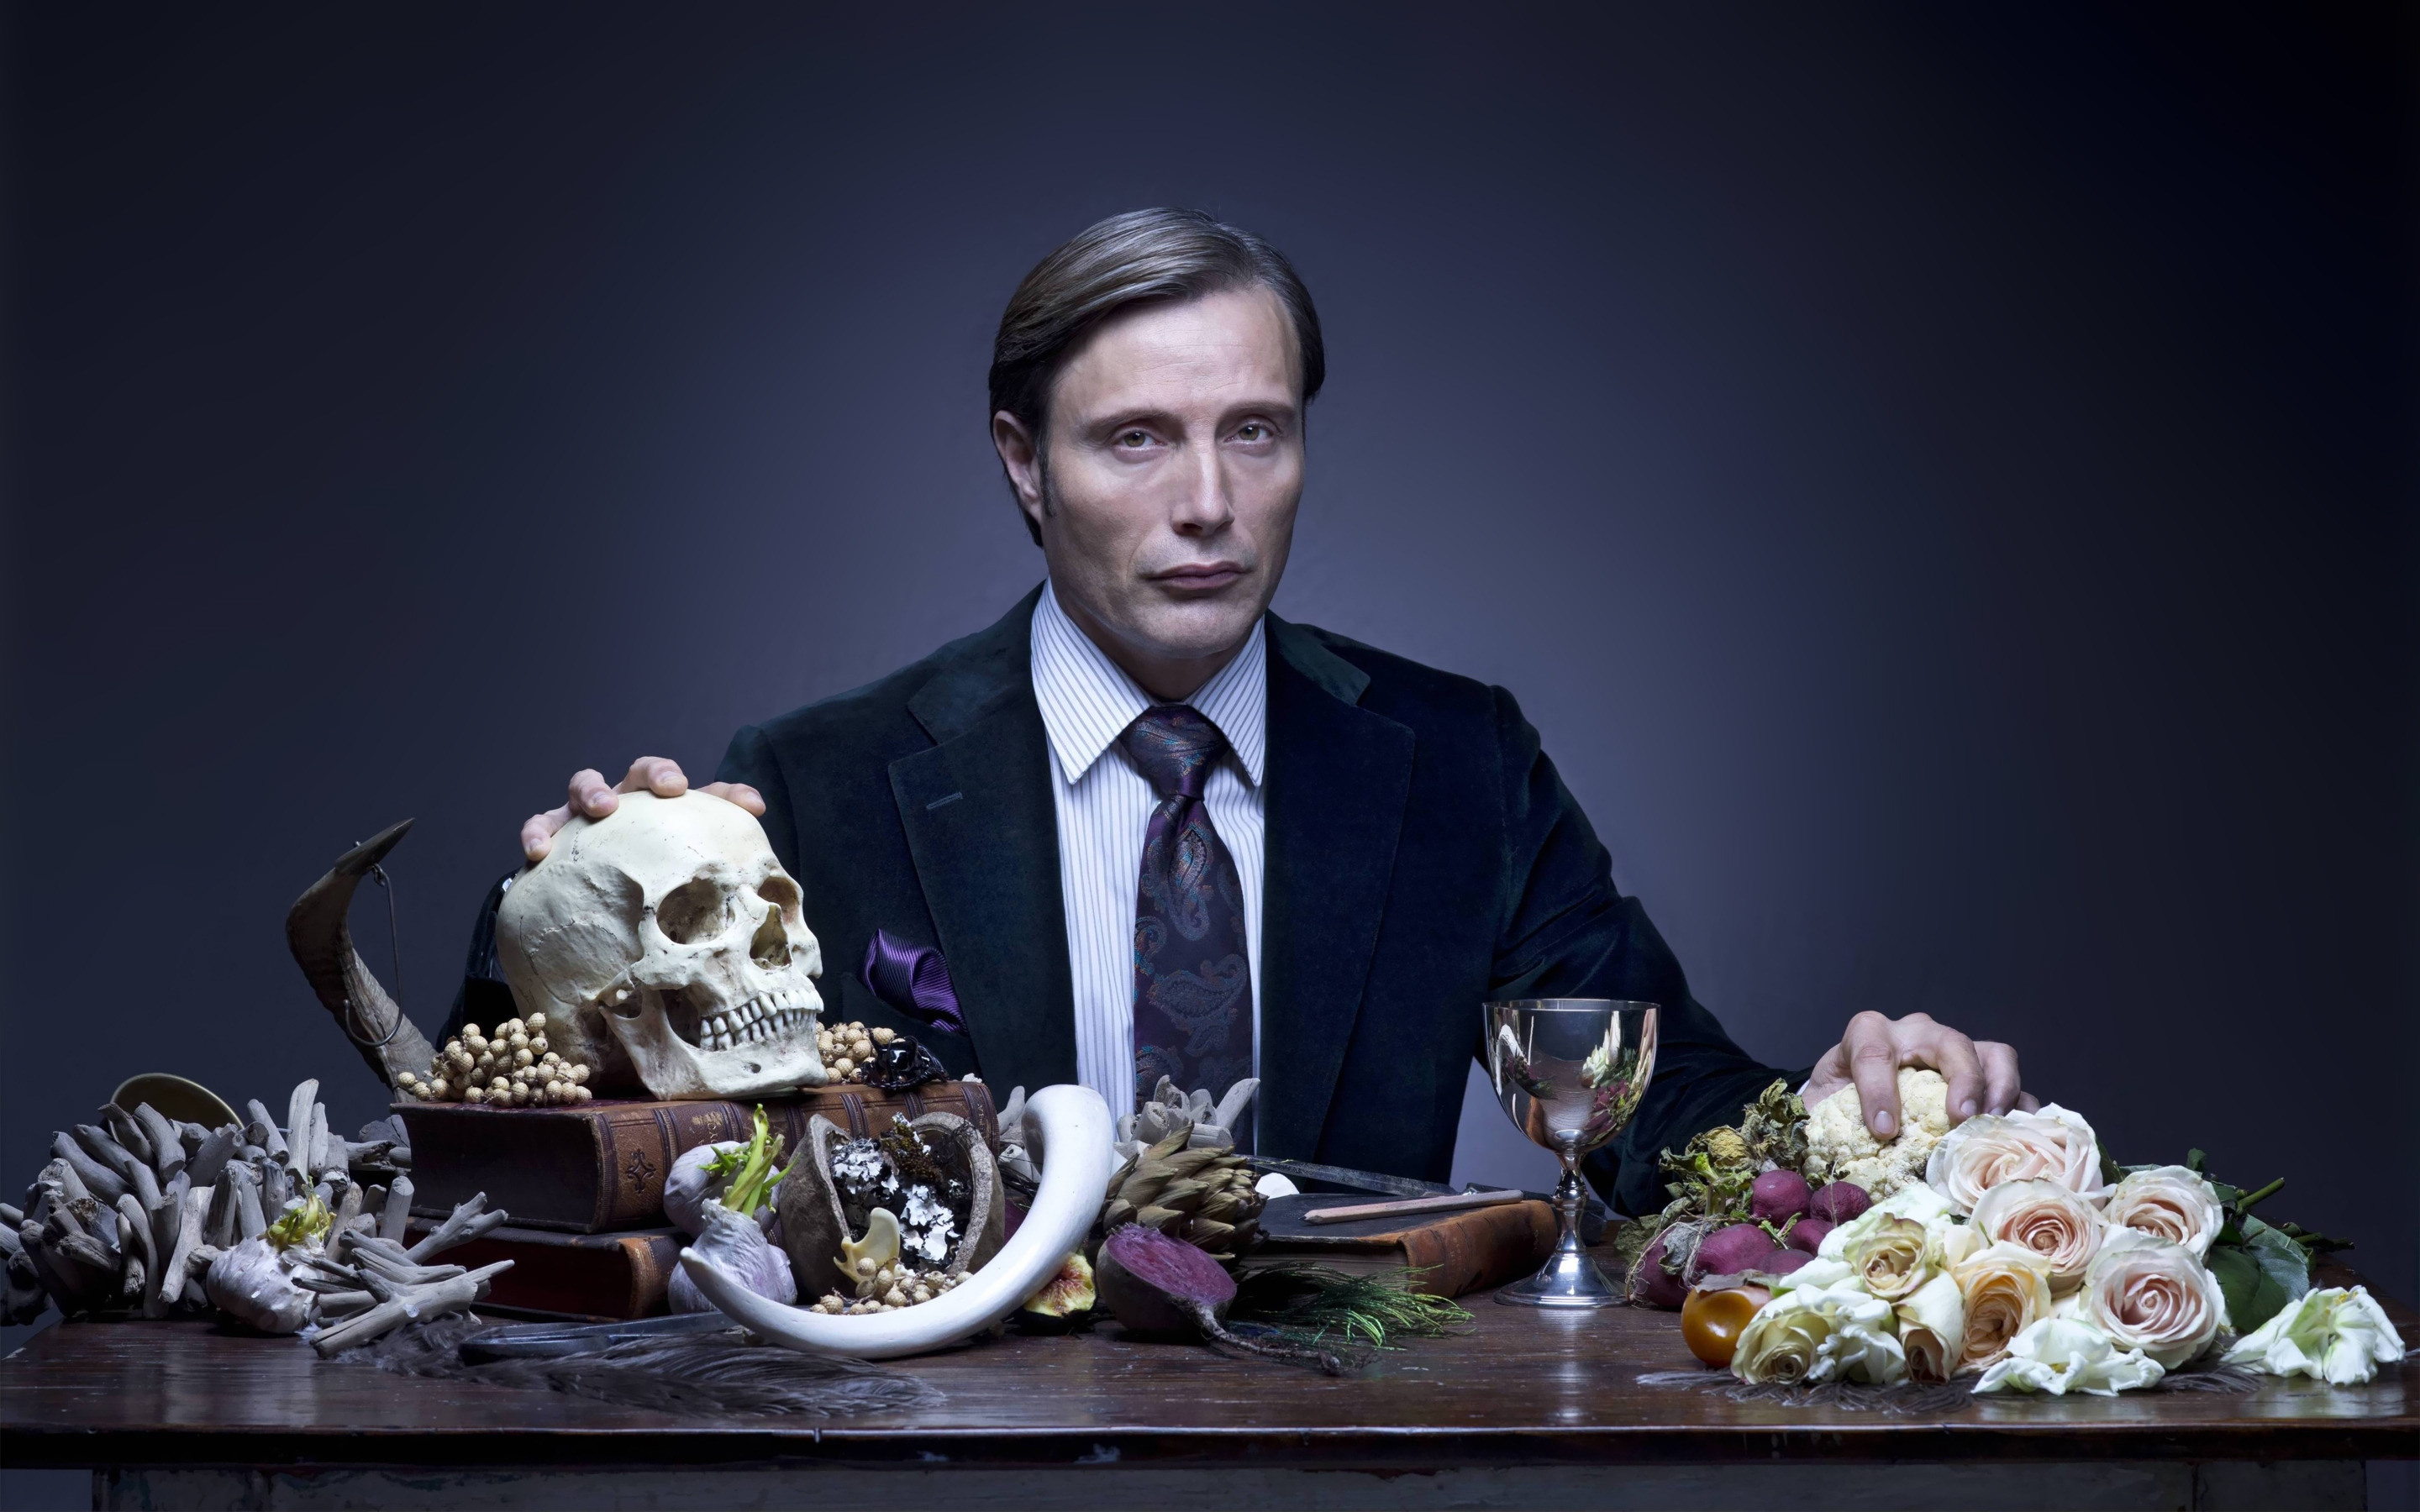 Dr Hannibal Lecter for 2880 x 1800 Retina Display resolution